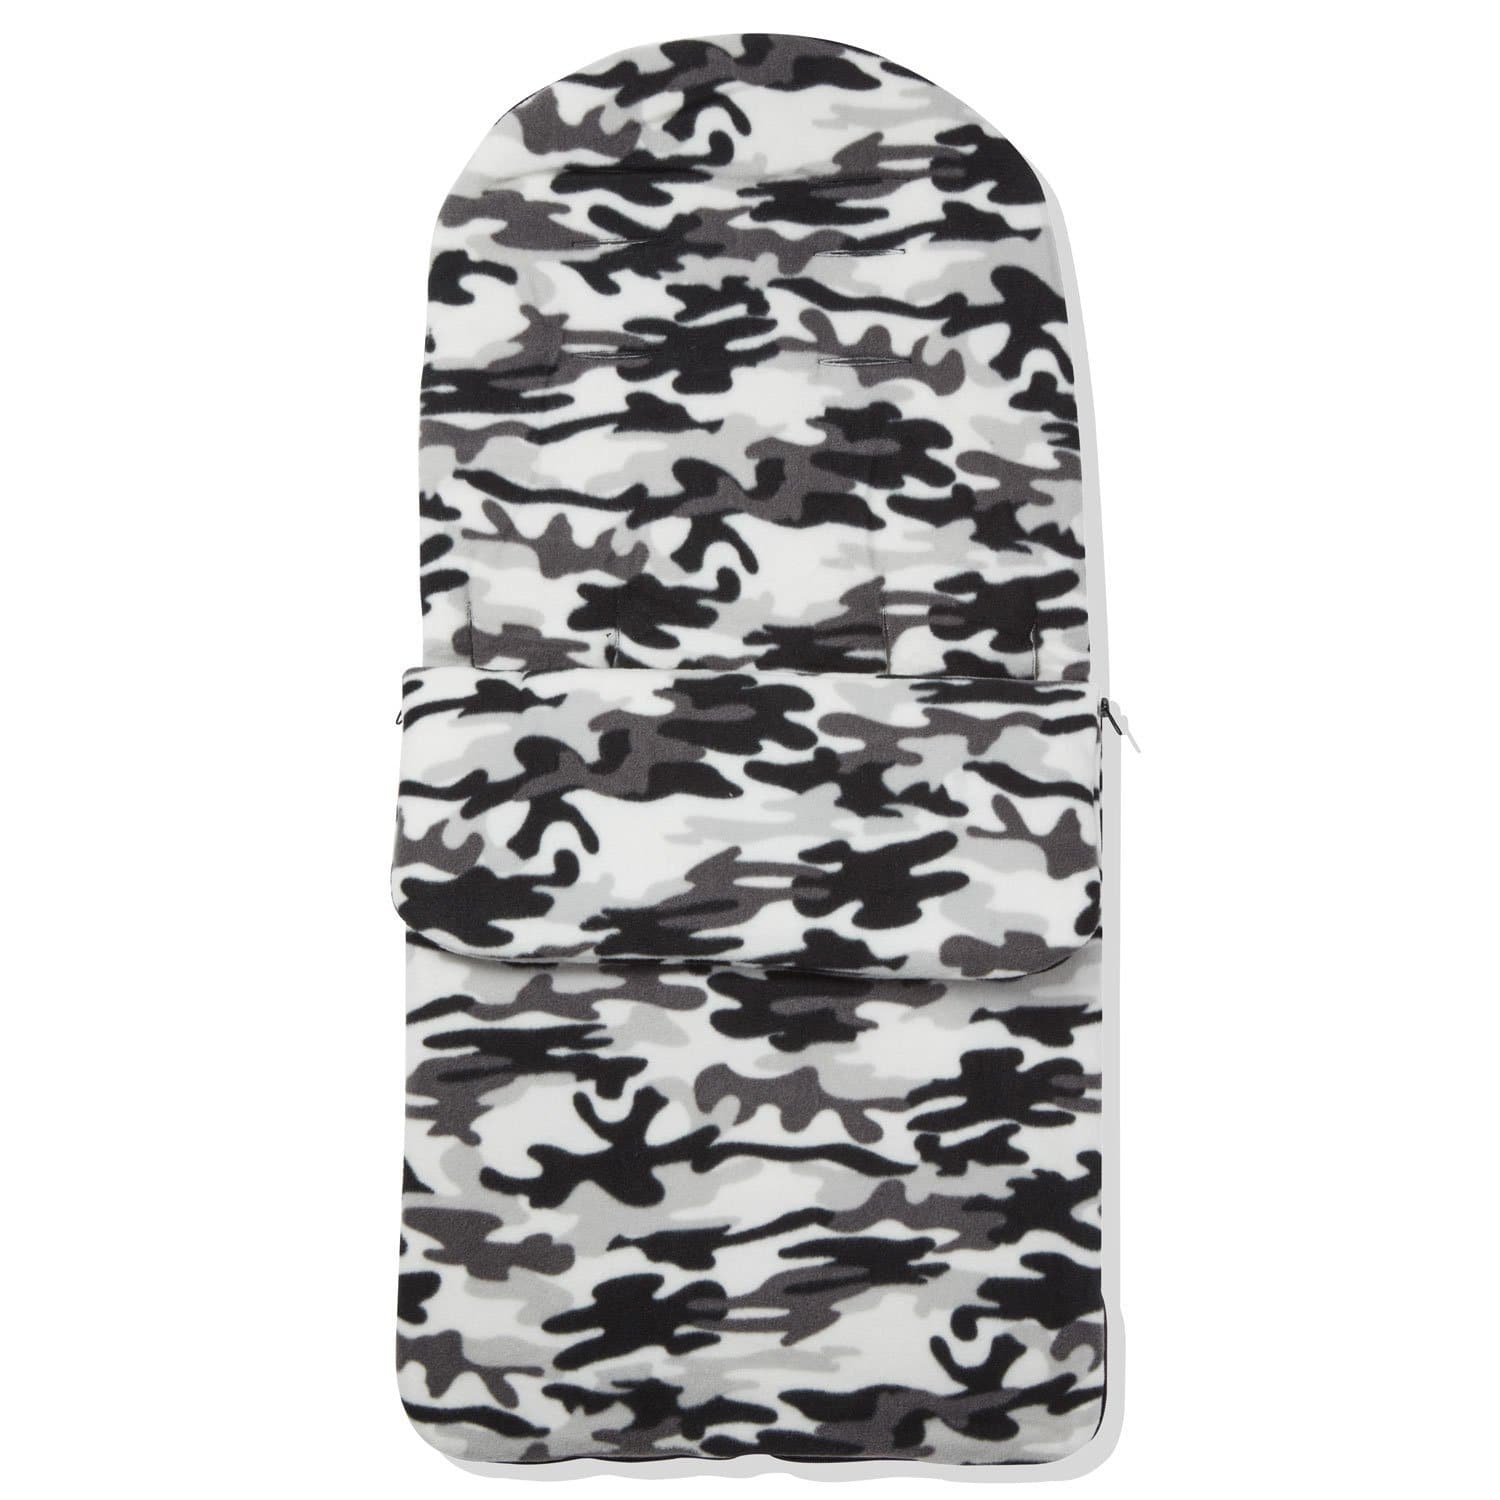 Fleece Footmuff / Cosy Toes Compatible with Uppababy - Grey Camouflage / Fits All Models | For Your Little One